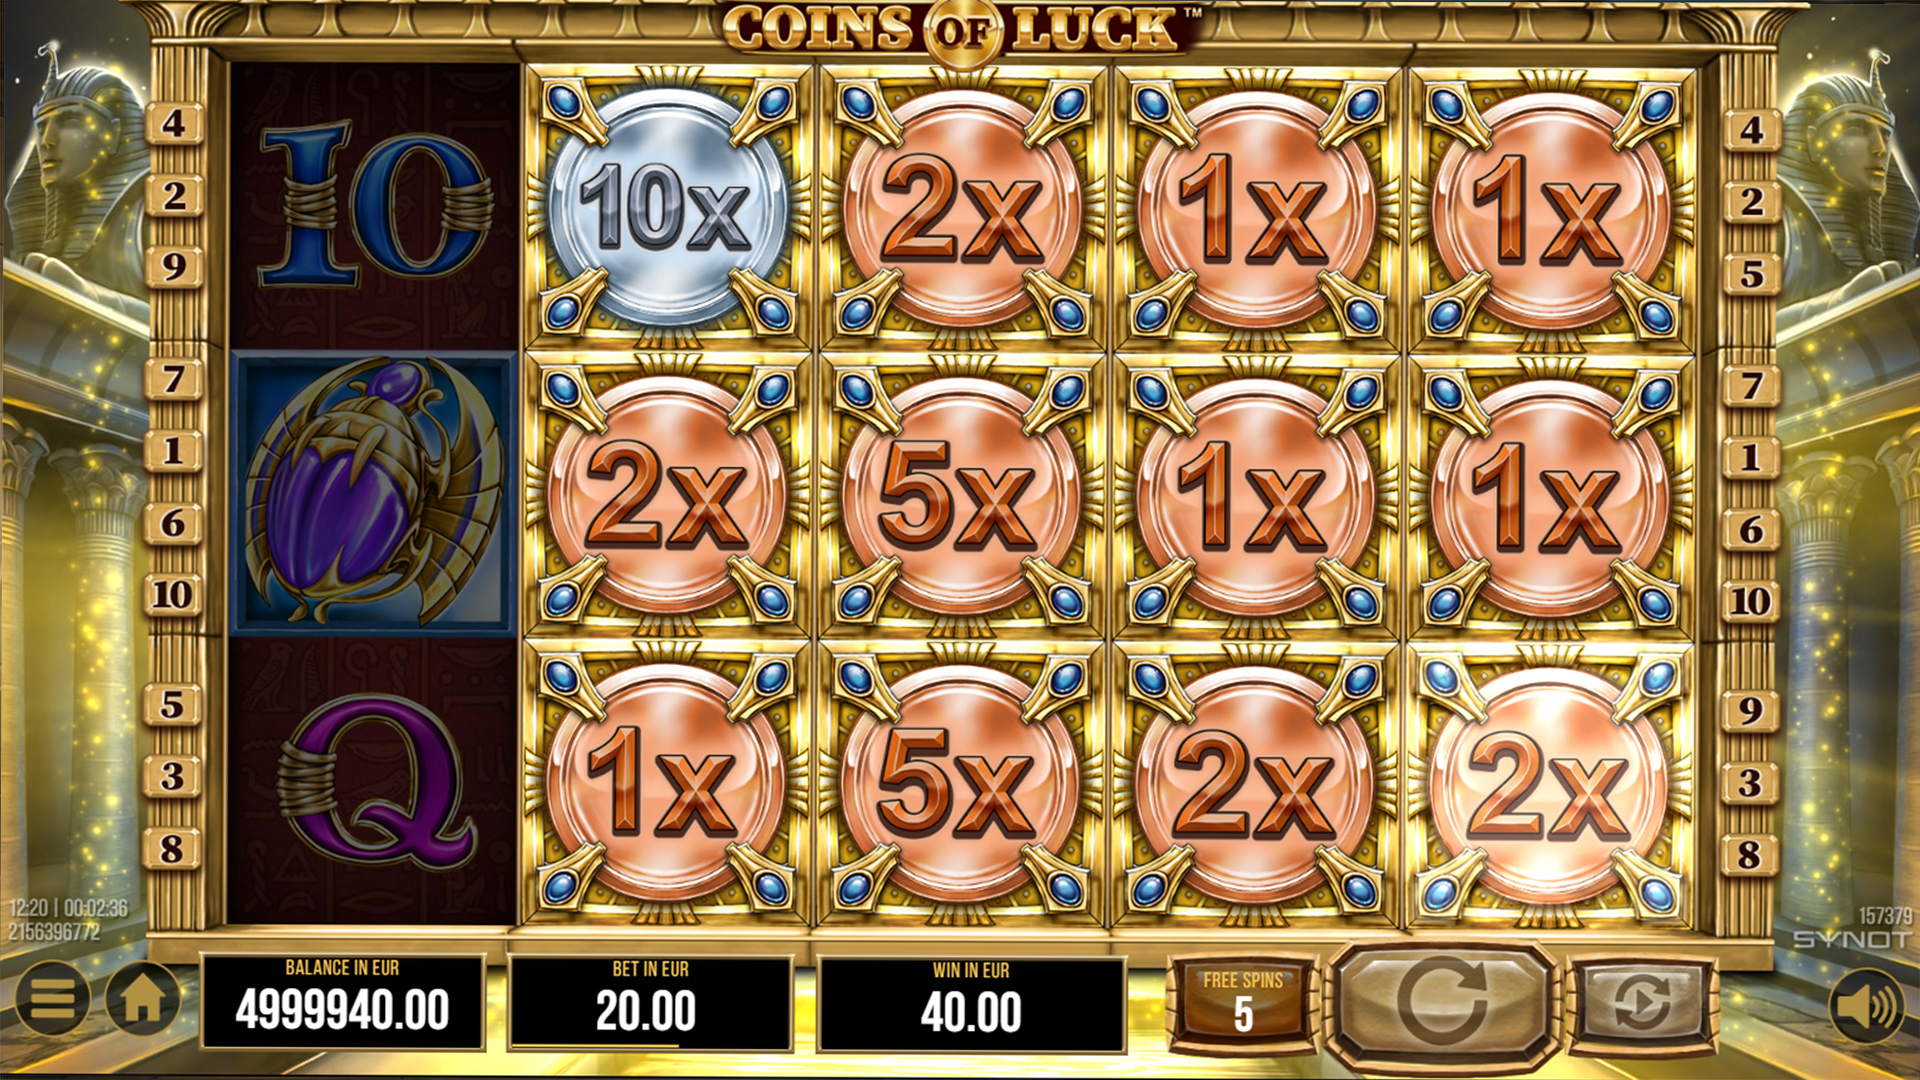 Coins of Luck Slot Free Spins